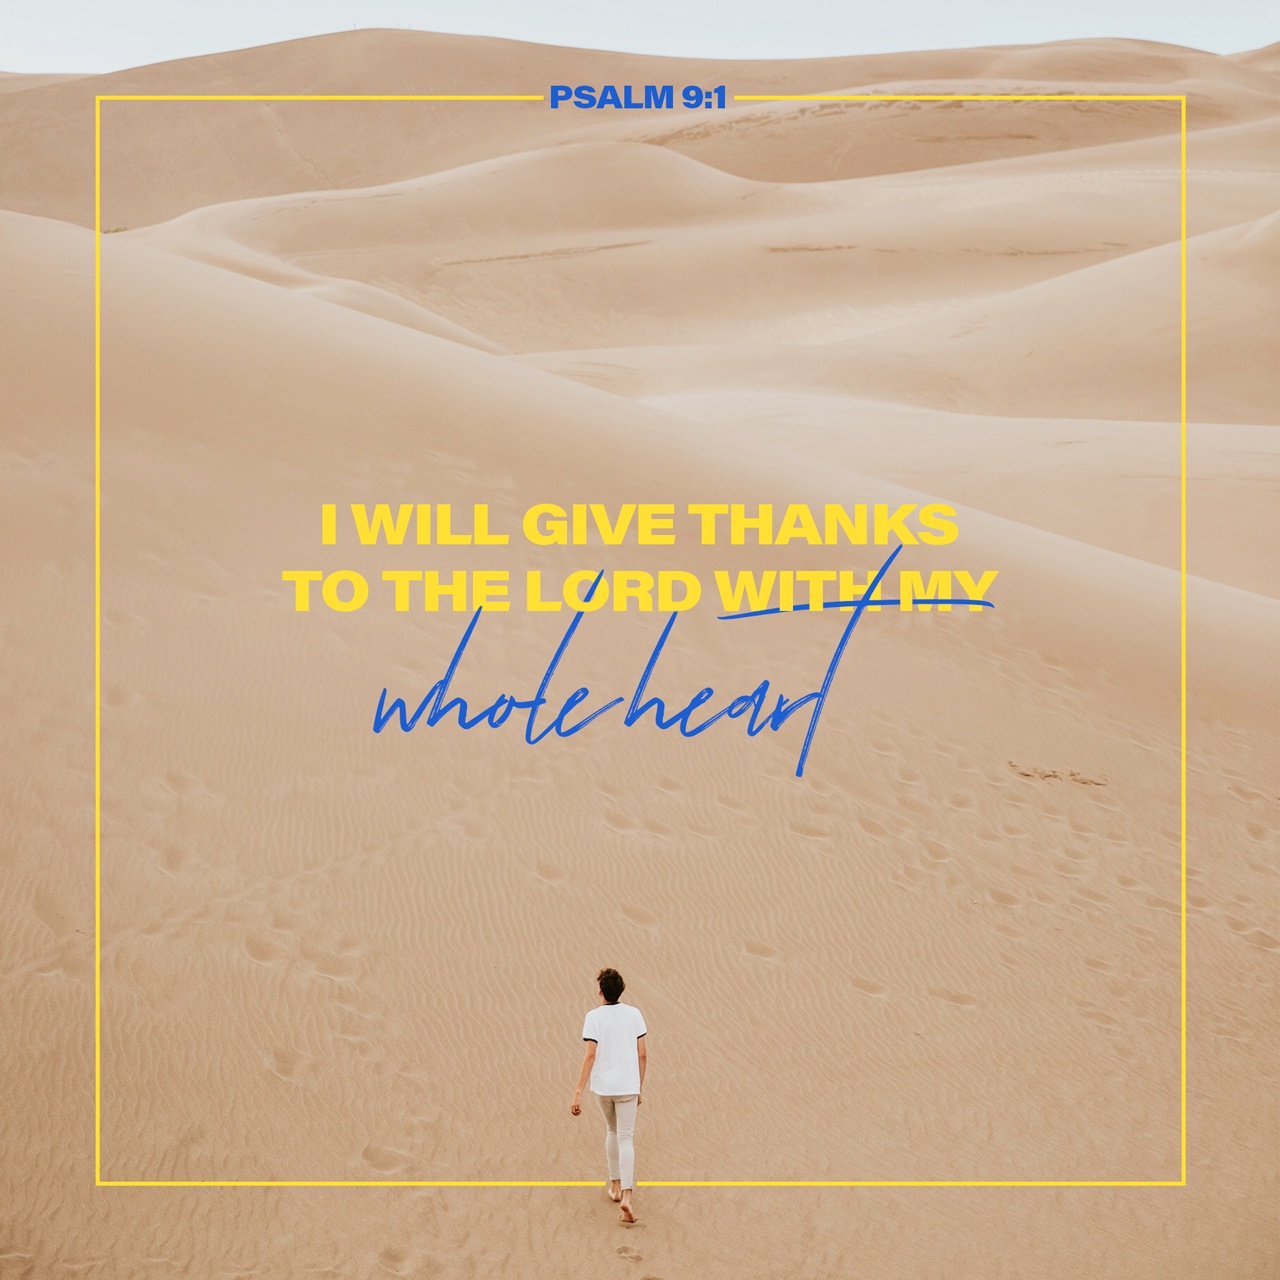 Psalm 9:1-2 I will give thanks to you, LORD, with all my heart; I will tell of all your wonderful deeds. I will be glad and rejoice in you; I will sing the praises of your name, O Most High. | New International Version (NIV) | Download The Bible App Now